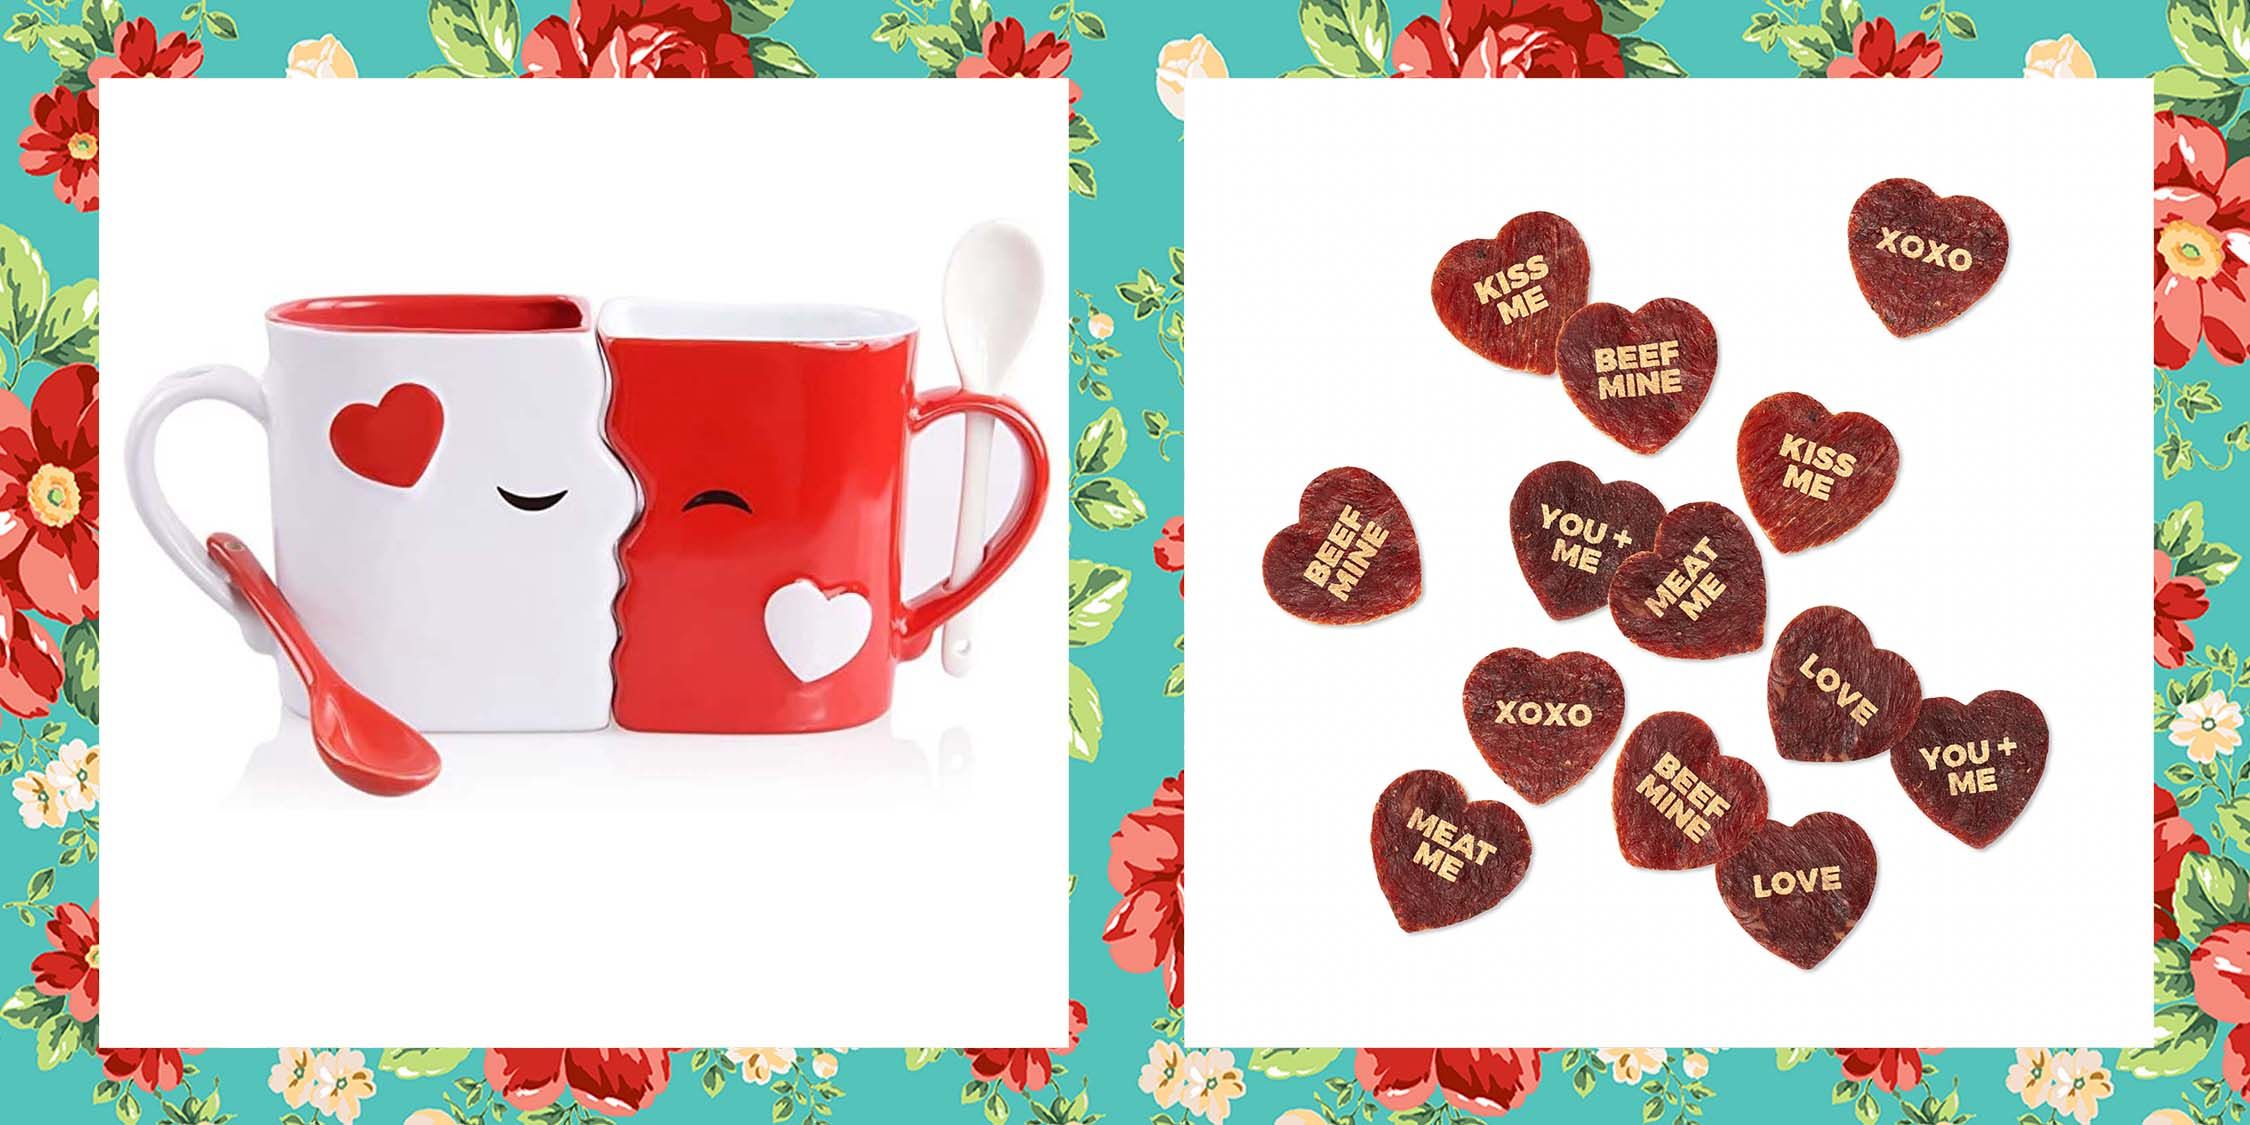 25 Funny Valentine's Day Gifts That'll Make Your Love Laugh